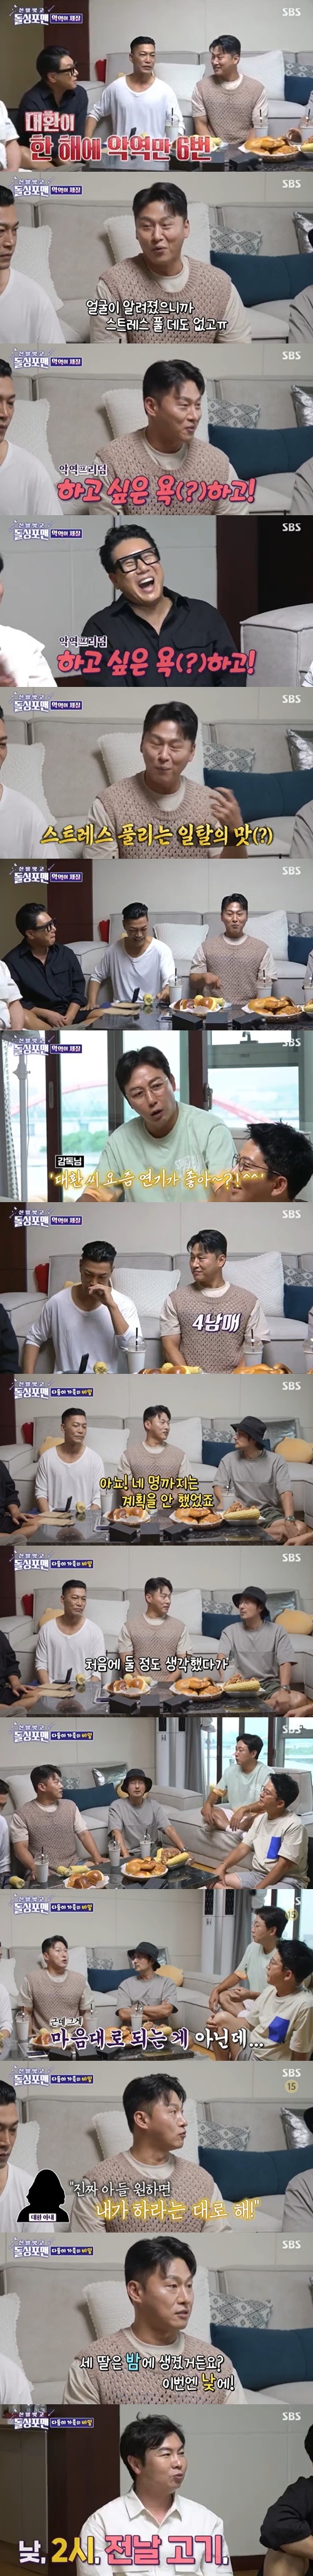  ⁇  Dollsing4men  ⁇  Dae-hwan Oh revealed the behind-the-scenes father.Choi Gwi-hwa, Dae-hwan Oh, and Hyeong-jun Lim appeared in the SBS entertainment program  ⁇  Take off your shoes and dolsing foreman  ⁇  (Dollsing4men  ⁇ ) broadcast on the afternoon of the 4th.On the same day, Lee Sang-min said, This is a scary question. This is serious, he said. I played six villains a year.Dae-Hwan Oh said, I was in charge of childcare at the time.He said, It is time for people to recognize it, so it is time when they can not express it.He added, I want to be a villain, I want to hurt, I want to hurt, I want to harass, said Choi Gwi-hwa.Tak Jae-hoon said, The director would have done it. I like the cut, the smoke is good, I said it nowadays, and Dae-Hwan Oh said, Ive heard a lot of such stories. Lee Sang-min pointed out that Dae-Hwan Oh is 4Brother and Sister, and Choi Gwi-hwa is 3Brother and Sister.Dae-Hwan Oh confessed that he did not plan until four, but thought about it at first, and the third was an accident.I also said that I had contraception, but my wife suddenly got pregnant.He gave birth to the third son, and his three daughters were so good. My wife persuaded me for about a year after my body recovered.Dae-Hwan Oh said, I have a good relationship with my mother and I was envious of it. He explained that he wanted a son who could play and play when he was old.I am really confident that I am going to be a daughter again. If you really want to make a son, you should do what I say.In addition, she made her daughter at night, and this time at 2 oclock in the afternoon, she fed meat the day before, told her to drink coffee, opened the story, and actually gave birth to son.